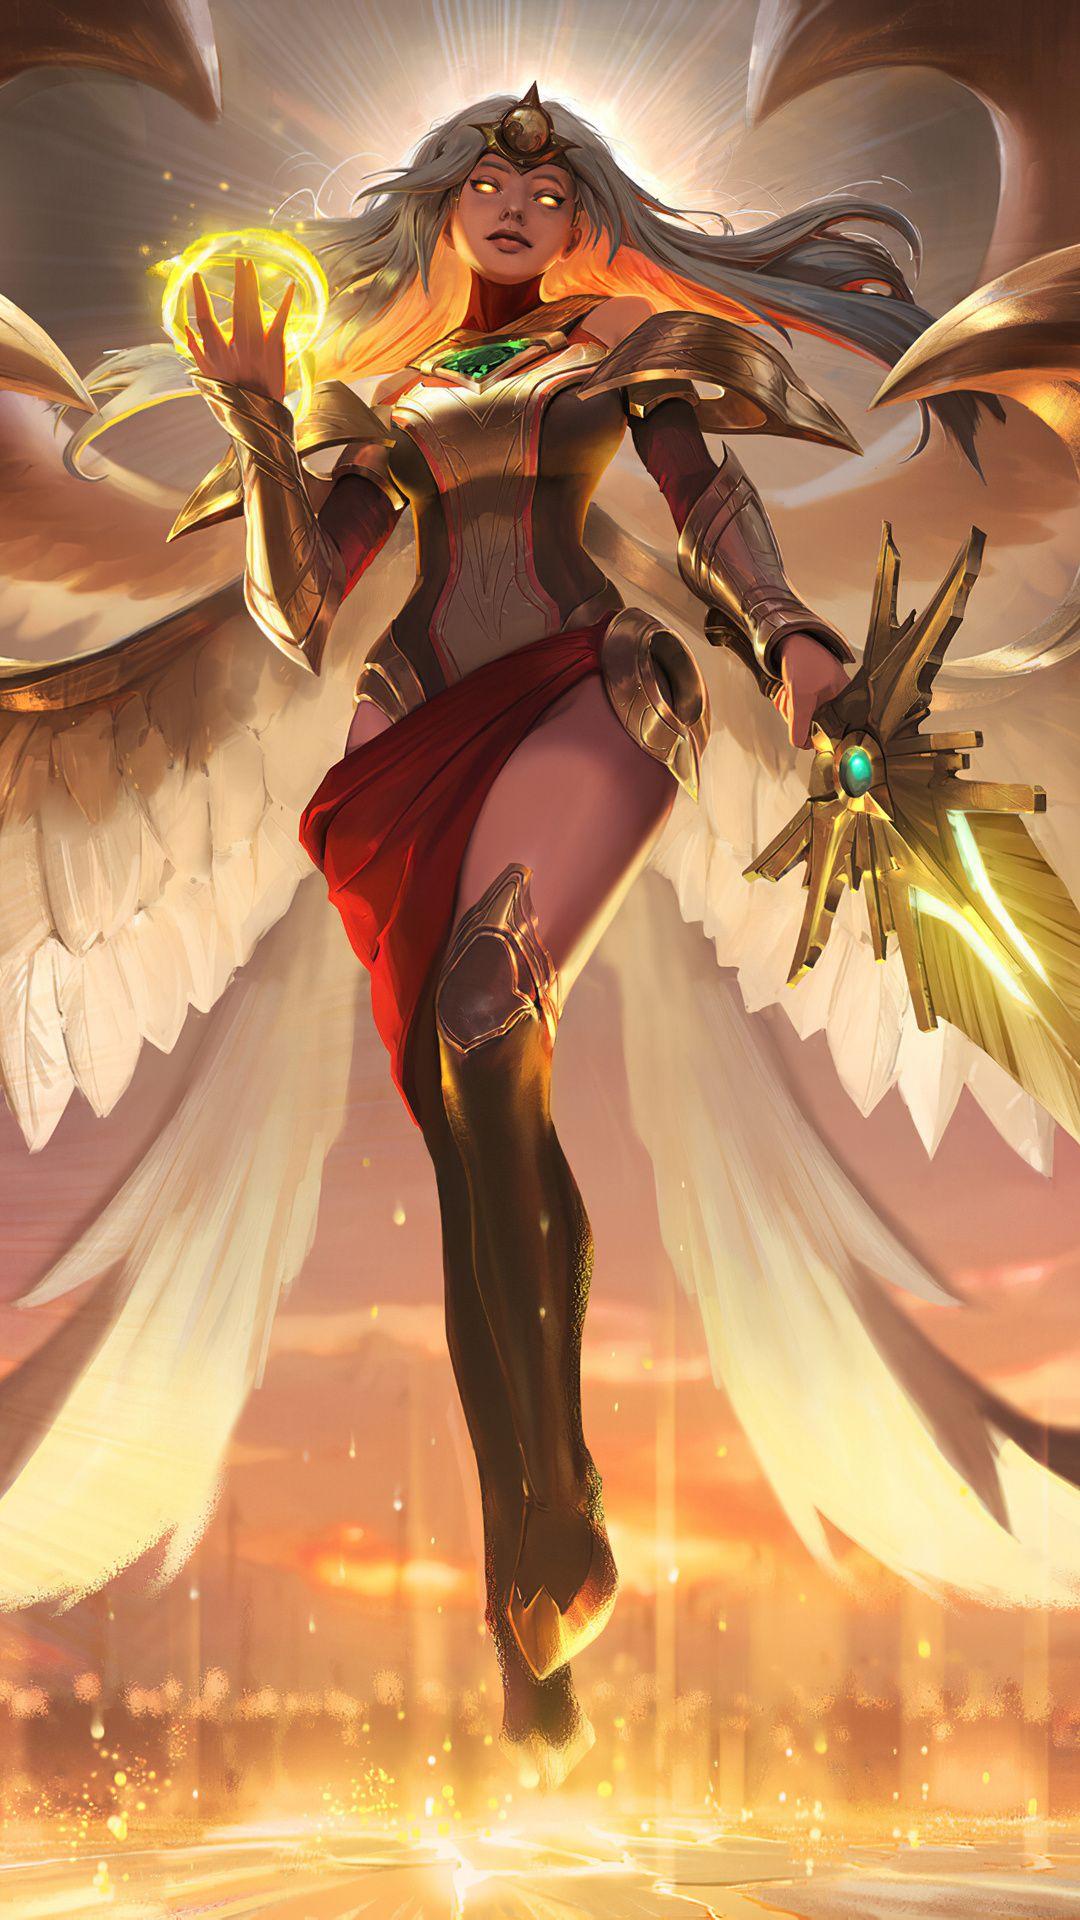 1080 x 1920 · jpeg - Kayle League Of Legends 4k Mobile Wallpaper (iPhone, Android, Samsung ...